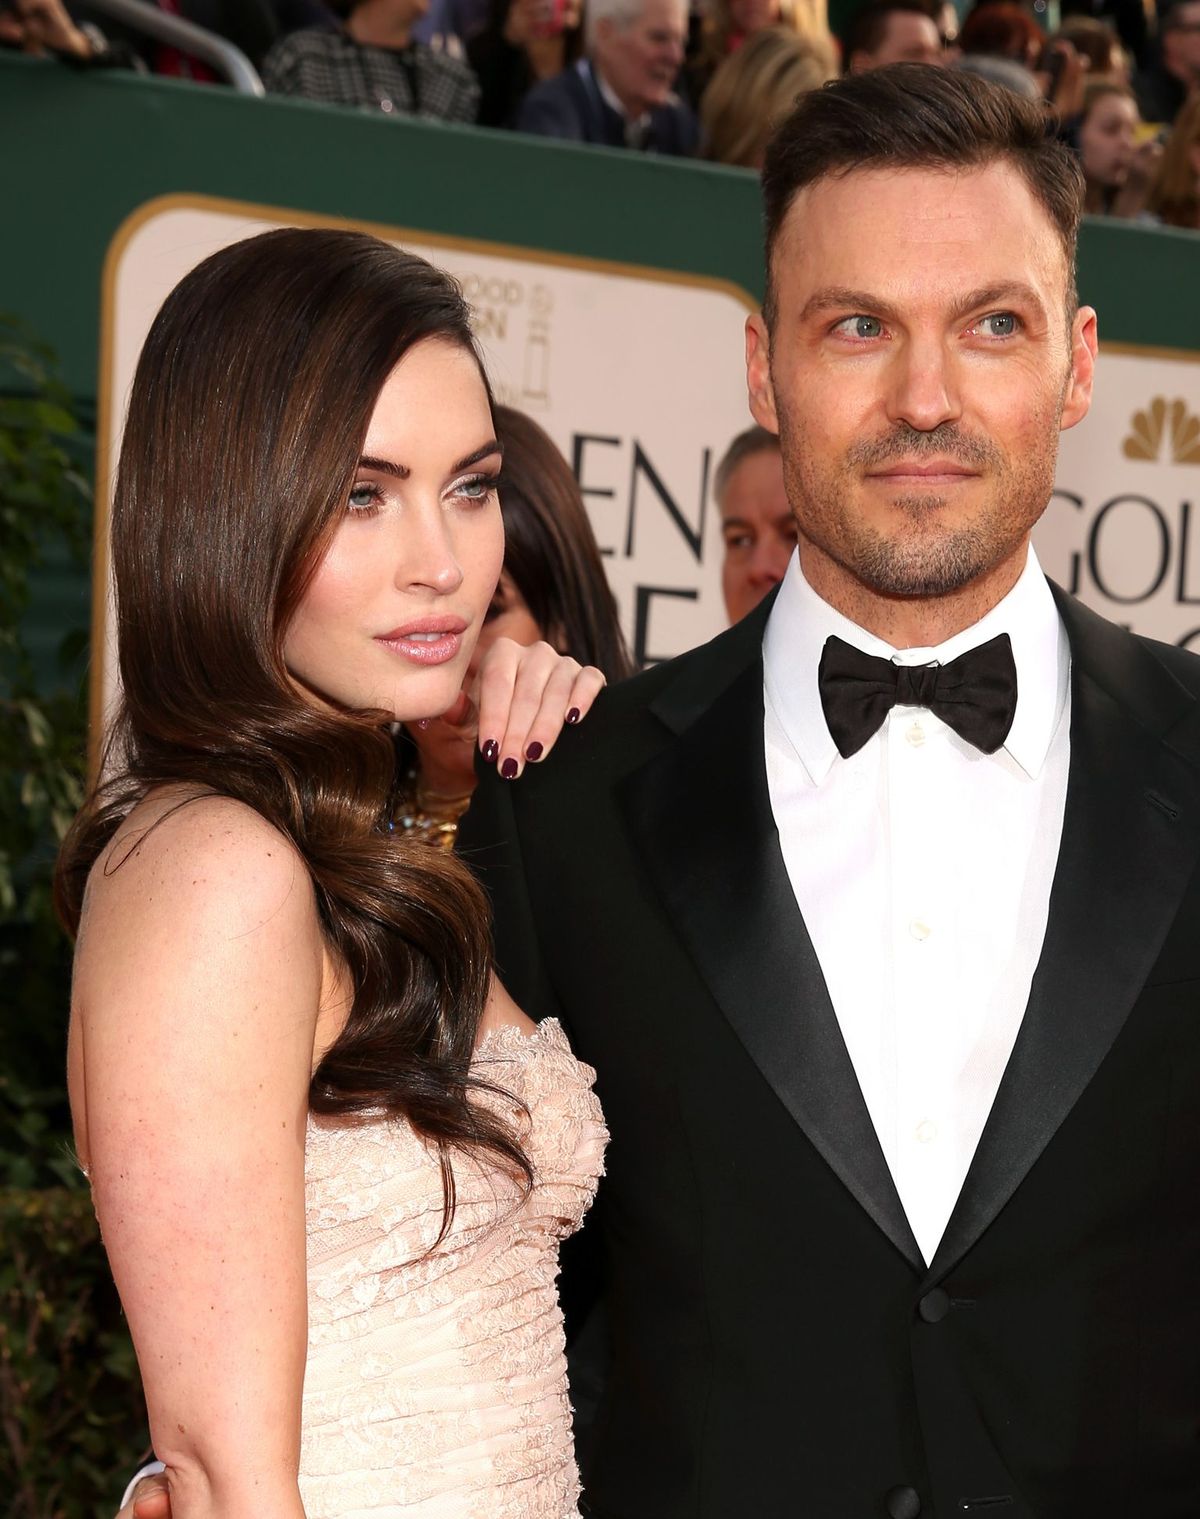 Megan Fox and Brian Austin Green at the 70th Annual Golden Globe Awards on January 13, 2013 | Photo: Christopher Polk/NBC/NBCUniversal/Getty Images